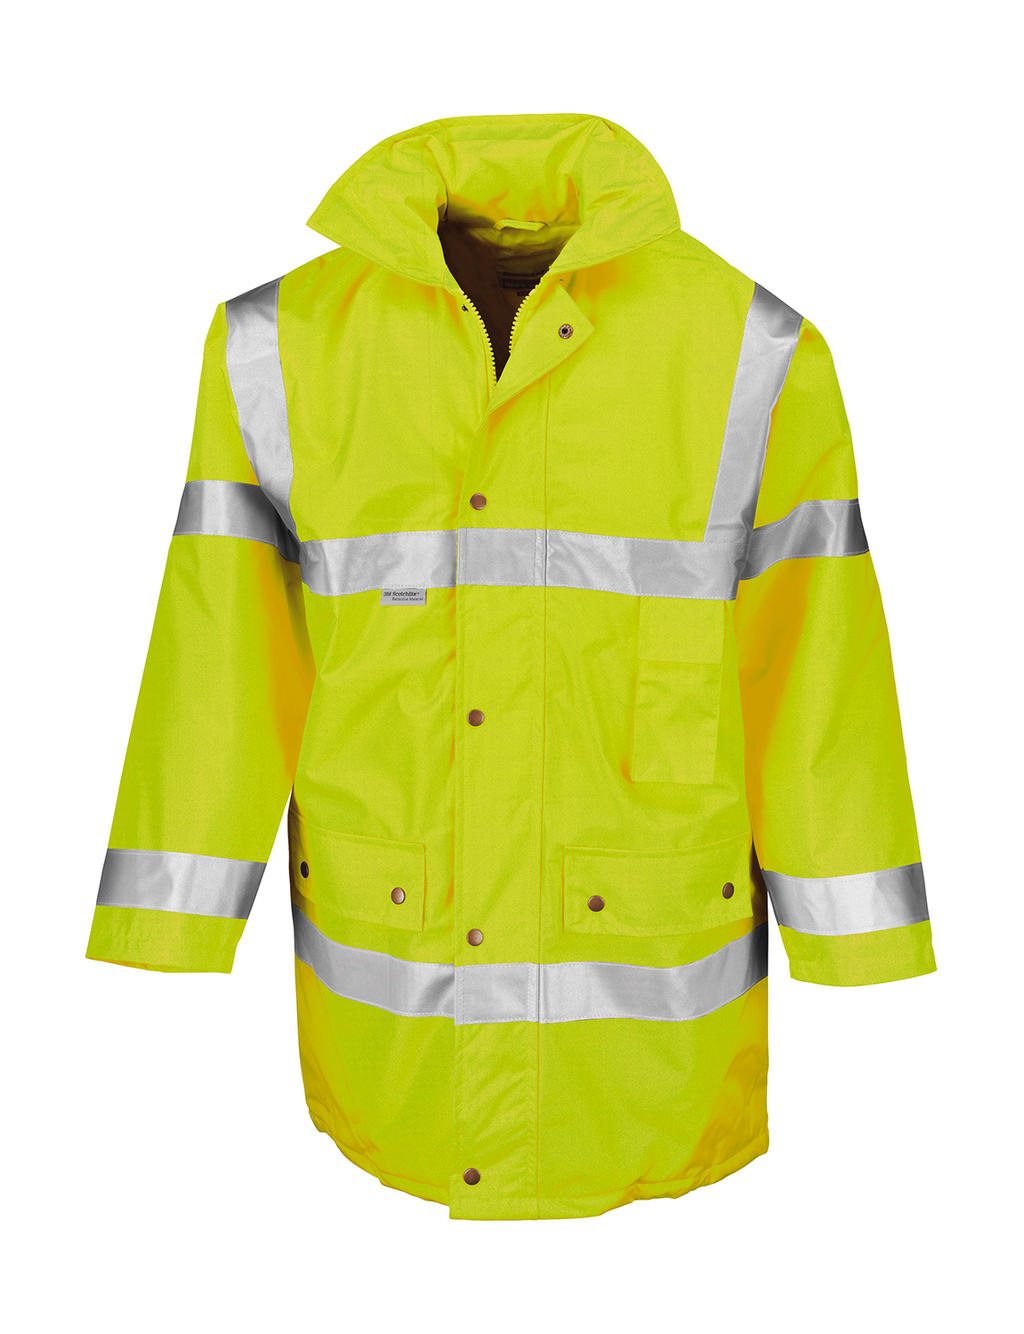  Safety Jacket in Farbe Fluorescent Yellow